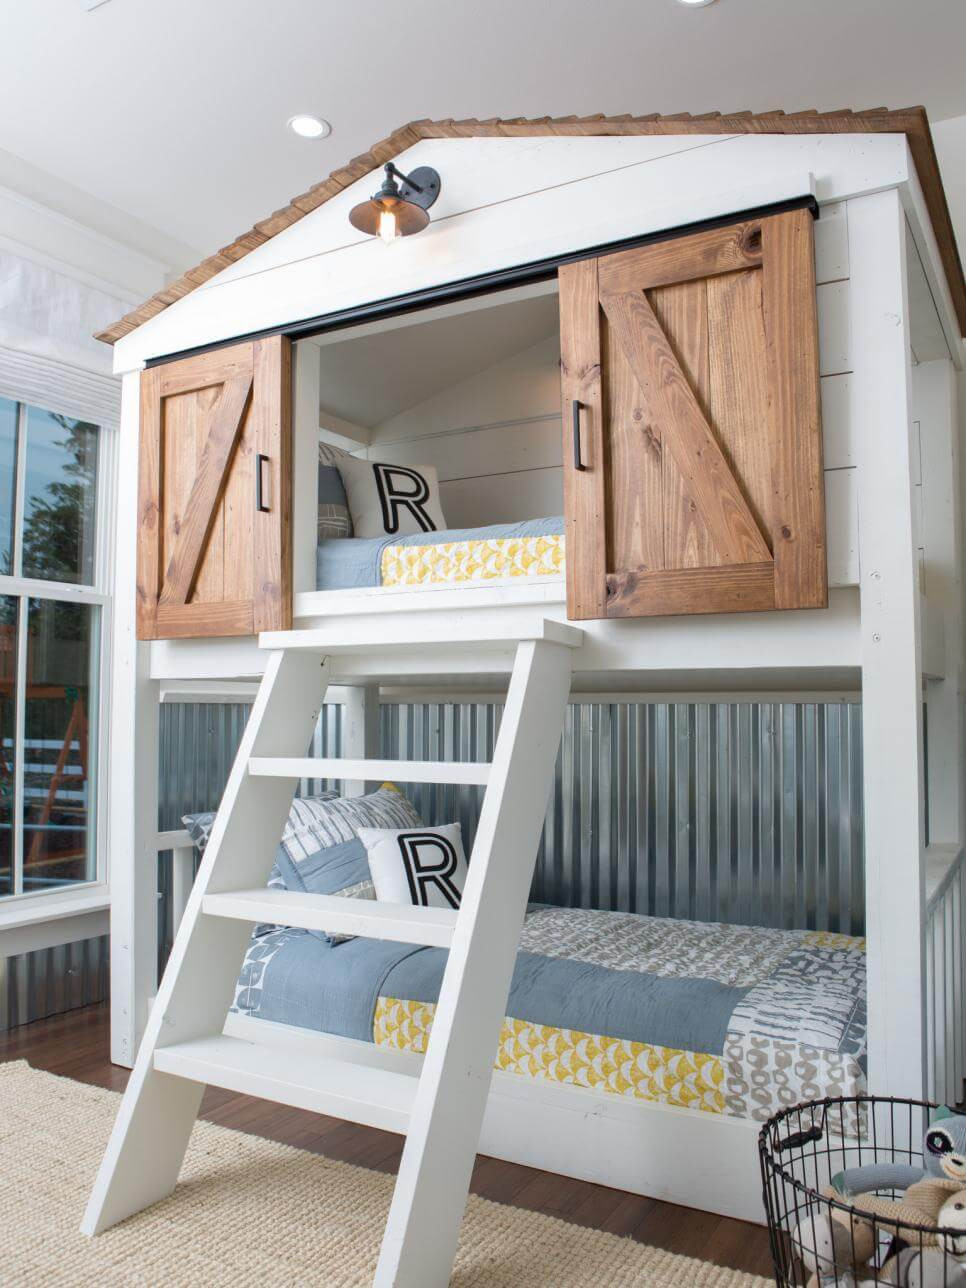 Kids Bedroom Loft
 Cool Bunk Beds You Wish You Had as a Kid